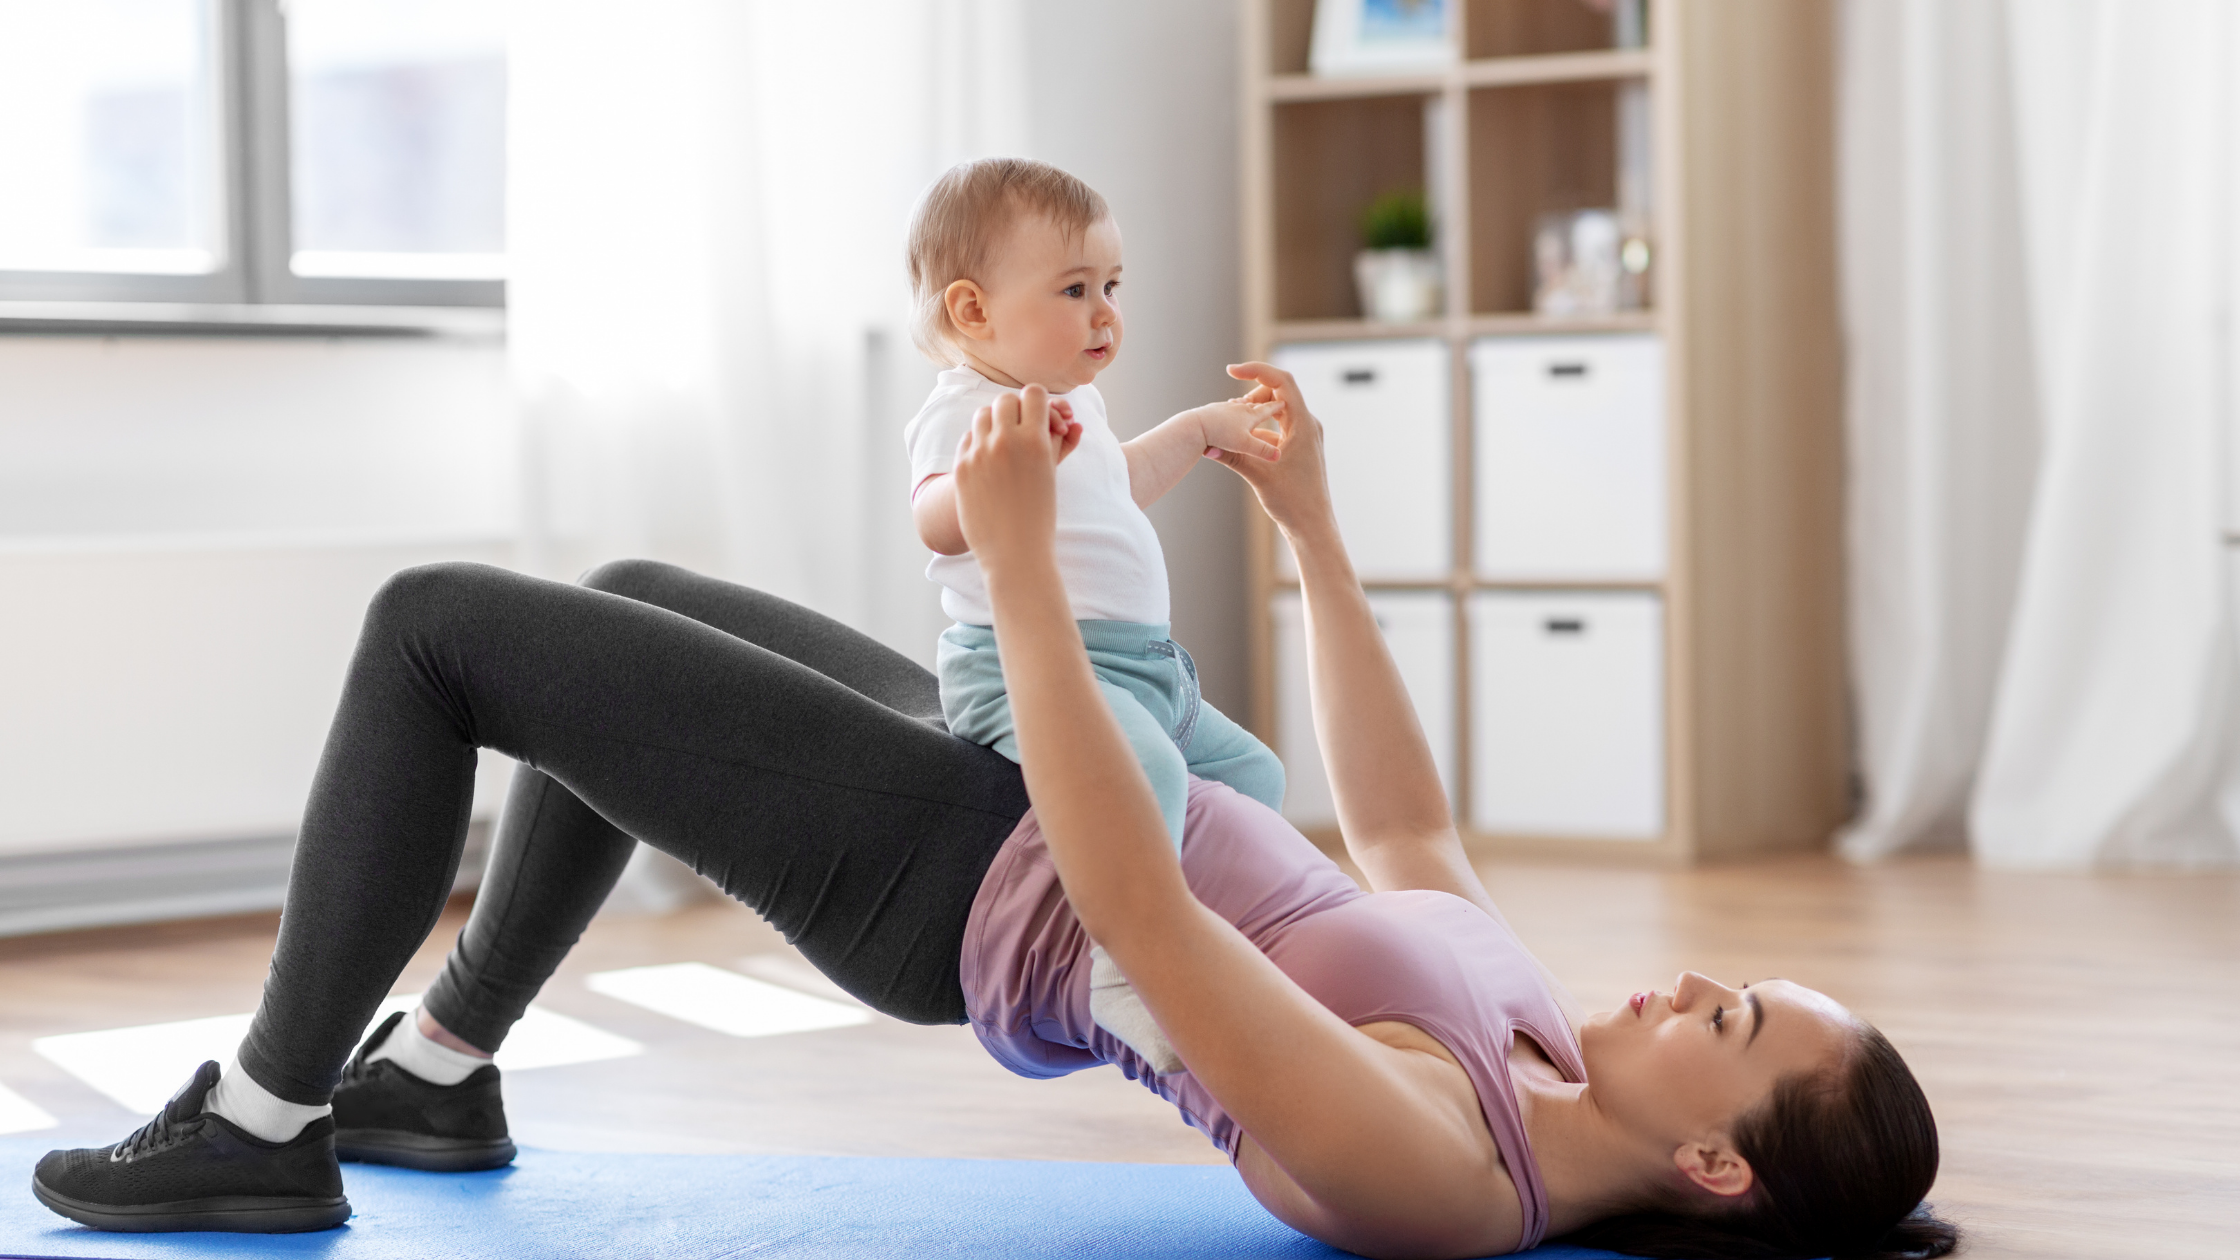 What is Pelvic Floor Physiotherapy?